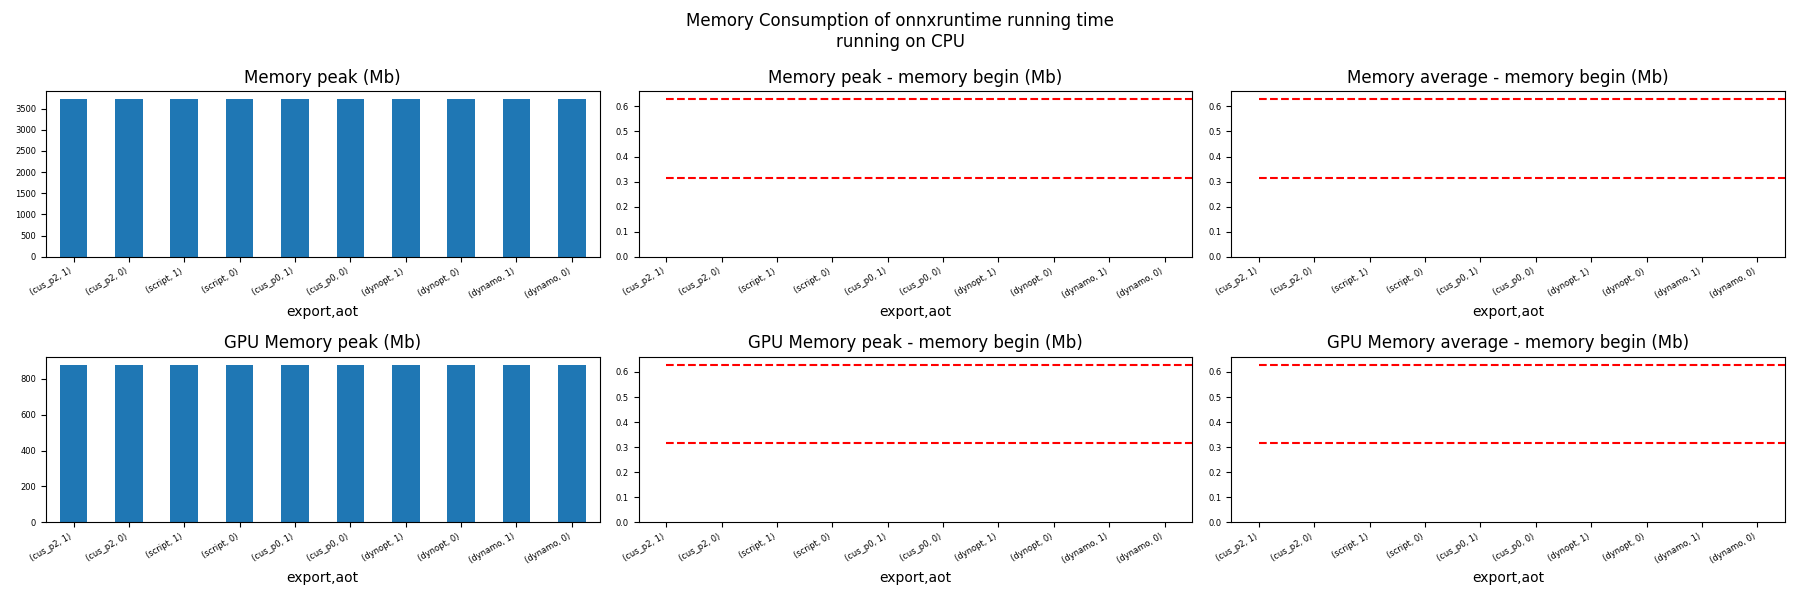 Memory Consumption of onnxruntime running time running on CPU, Memory peak (Mb), Memory peak - memory begin (Mb), Memory average - memory begin (Mb), GPU Memory peak (Mb), GPU Memory peak - memory begin (Mb), GPU Memory average - memory begin (Mb)